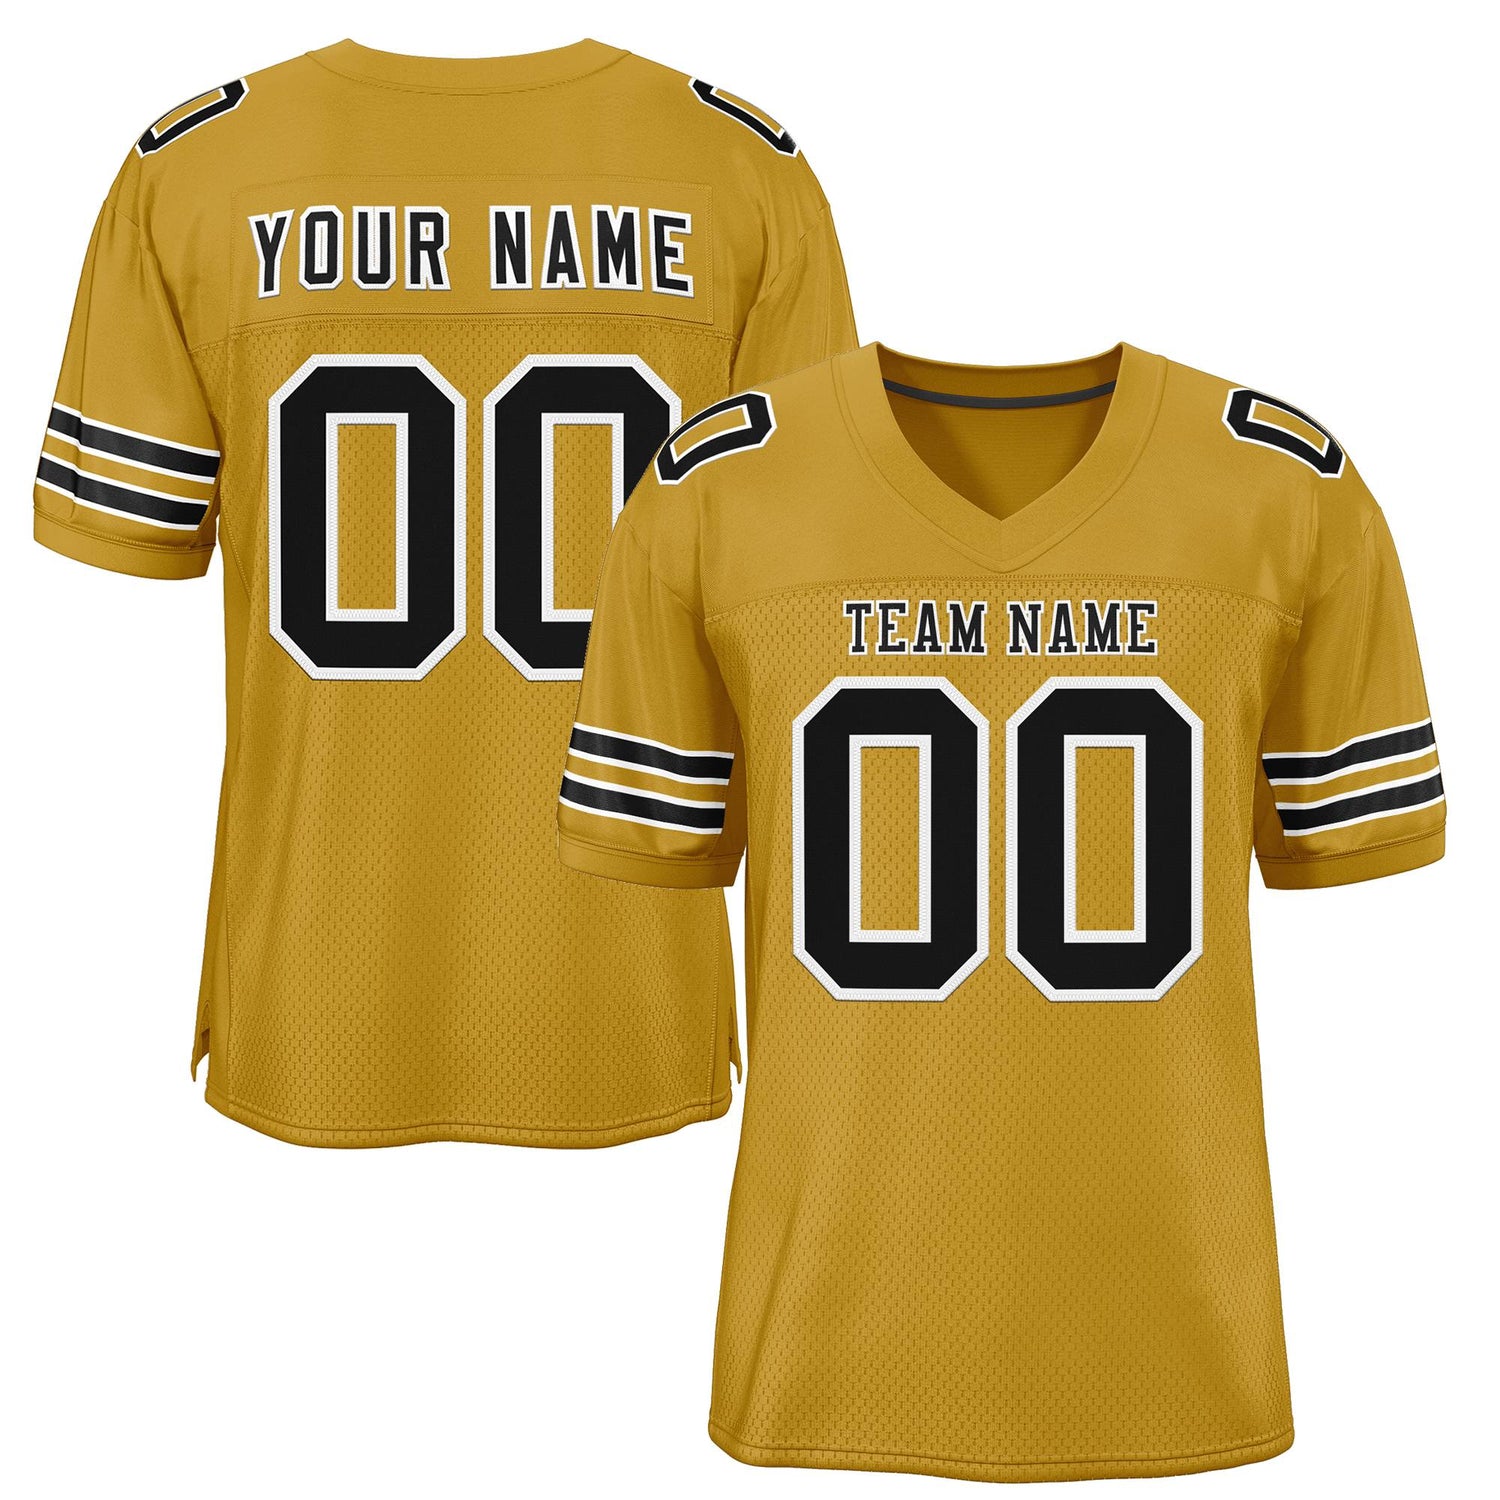 Old Gold Football Jersey